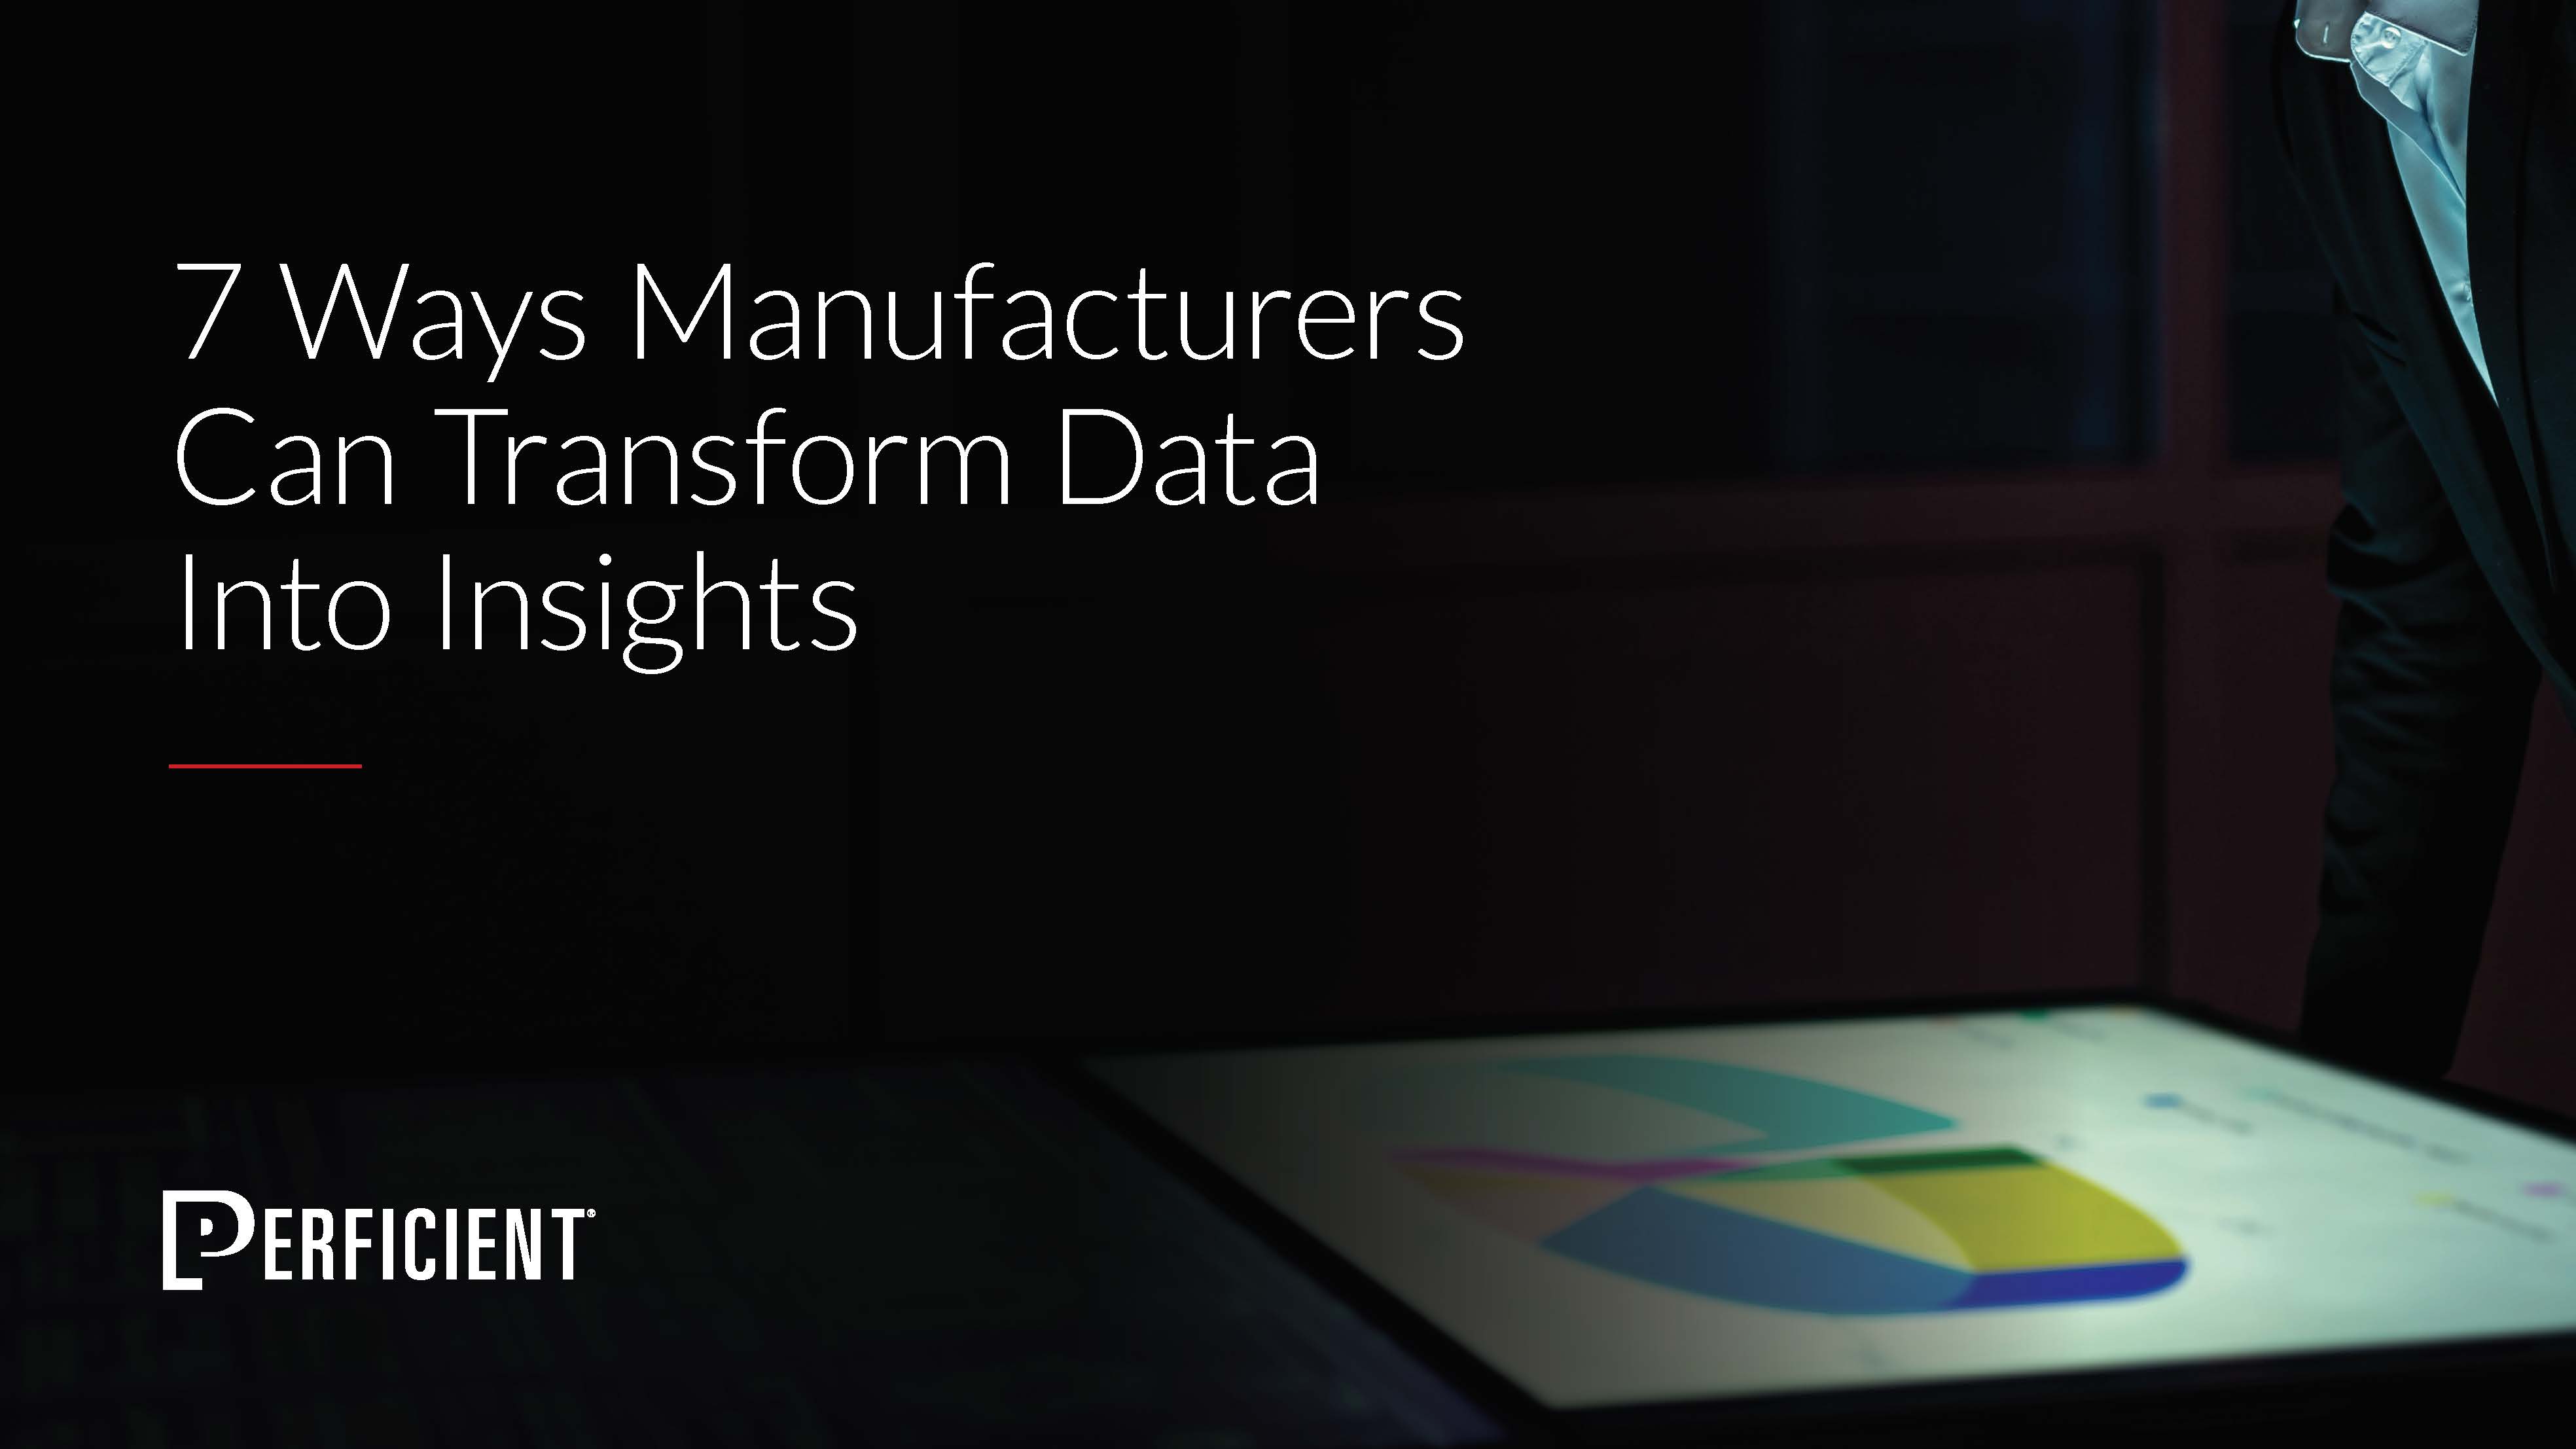 7 Ways Manufacturers Can Transform Data into Insights Guide Cover